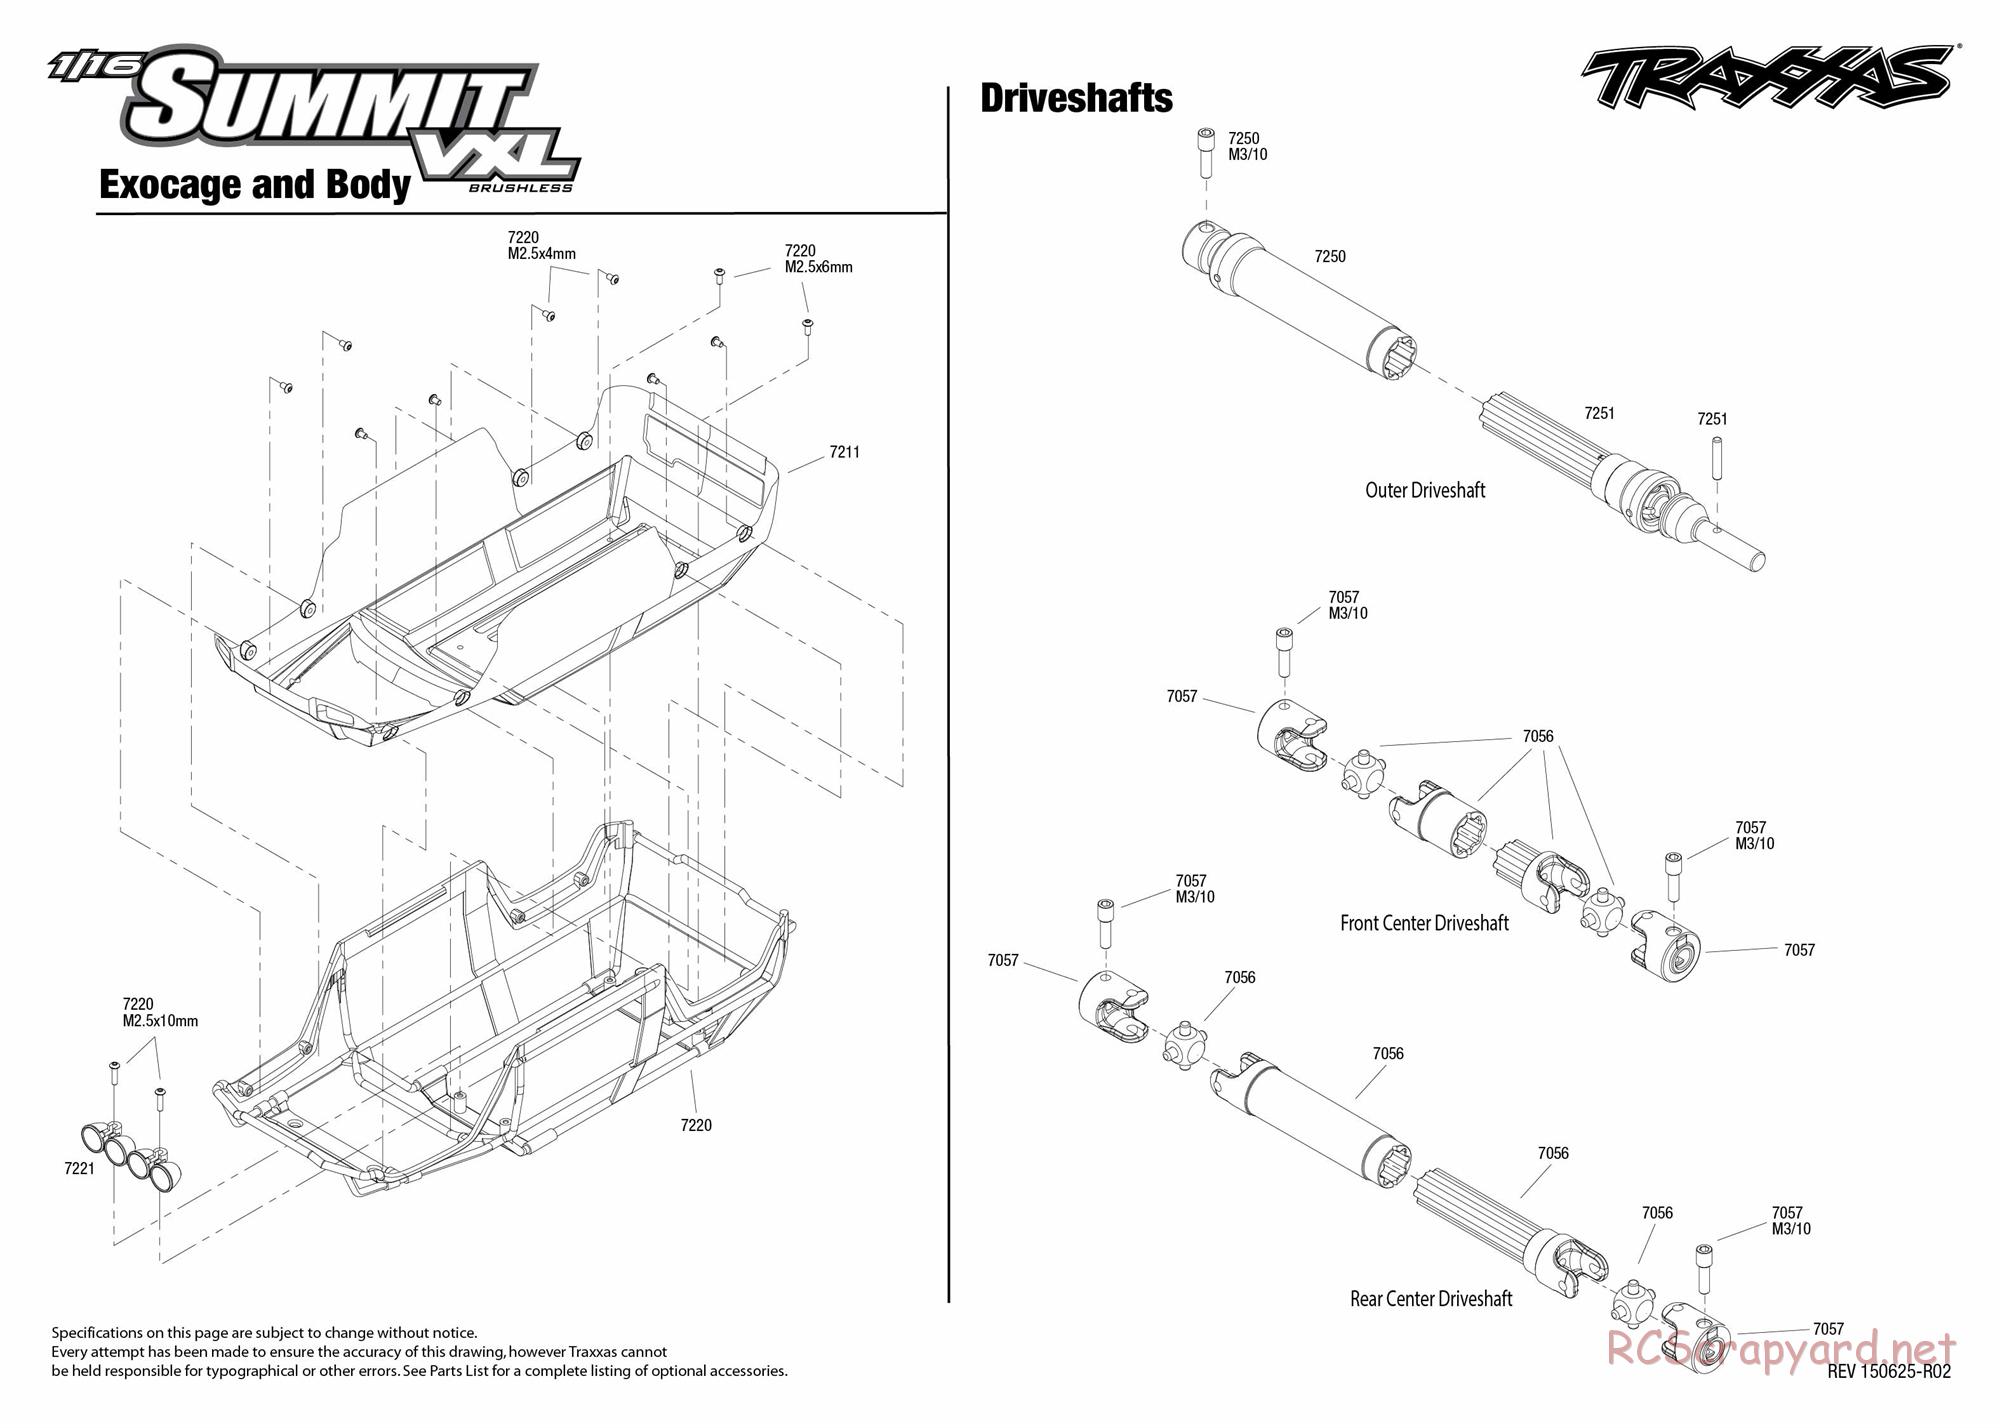 Traxxas - 1/16 Summit VXL (2015) - Exploded Views - Page 2